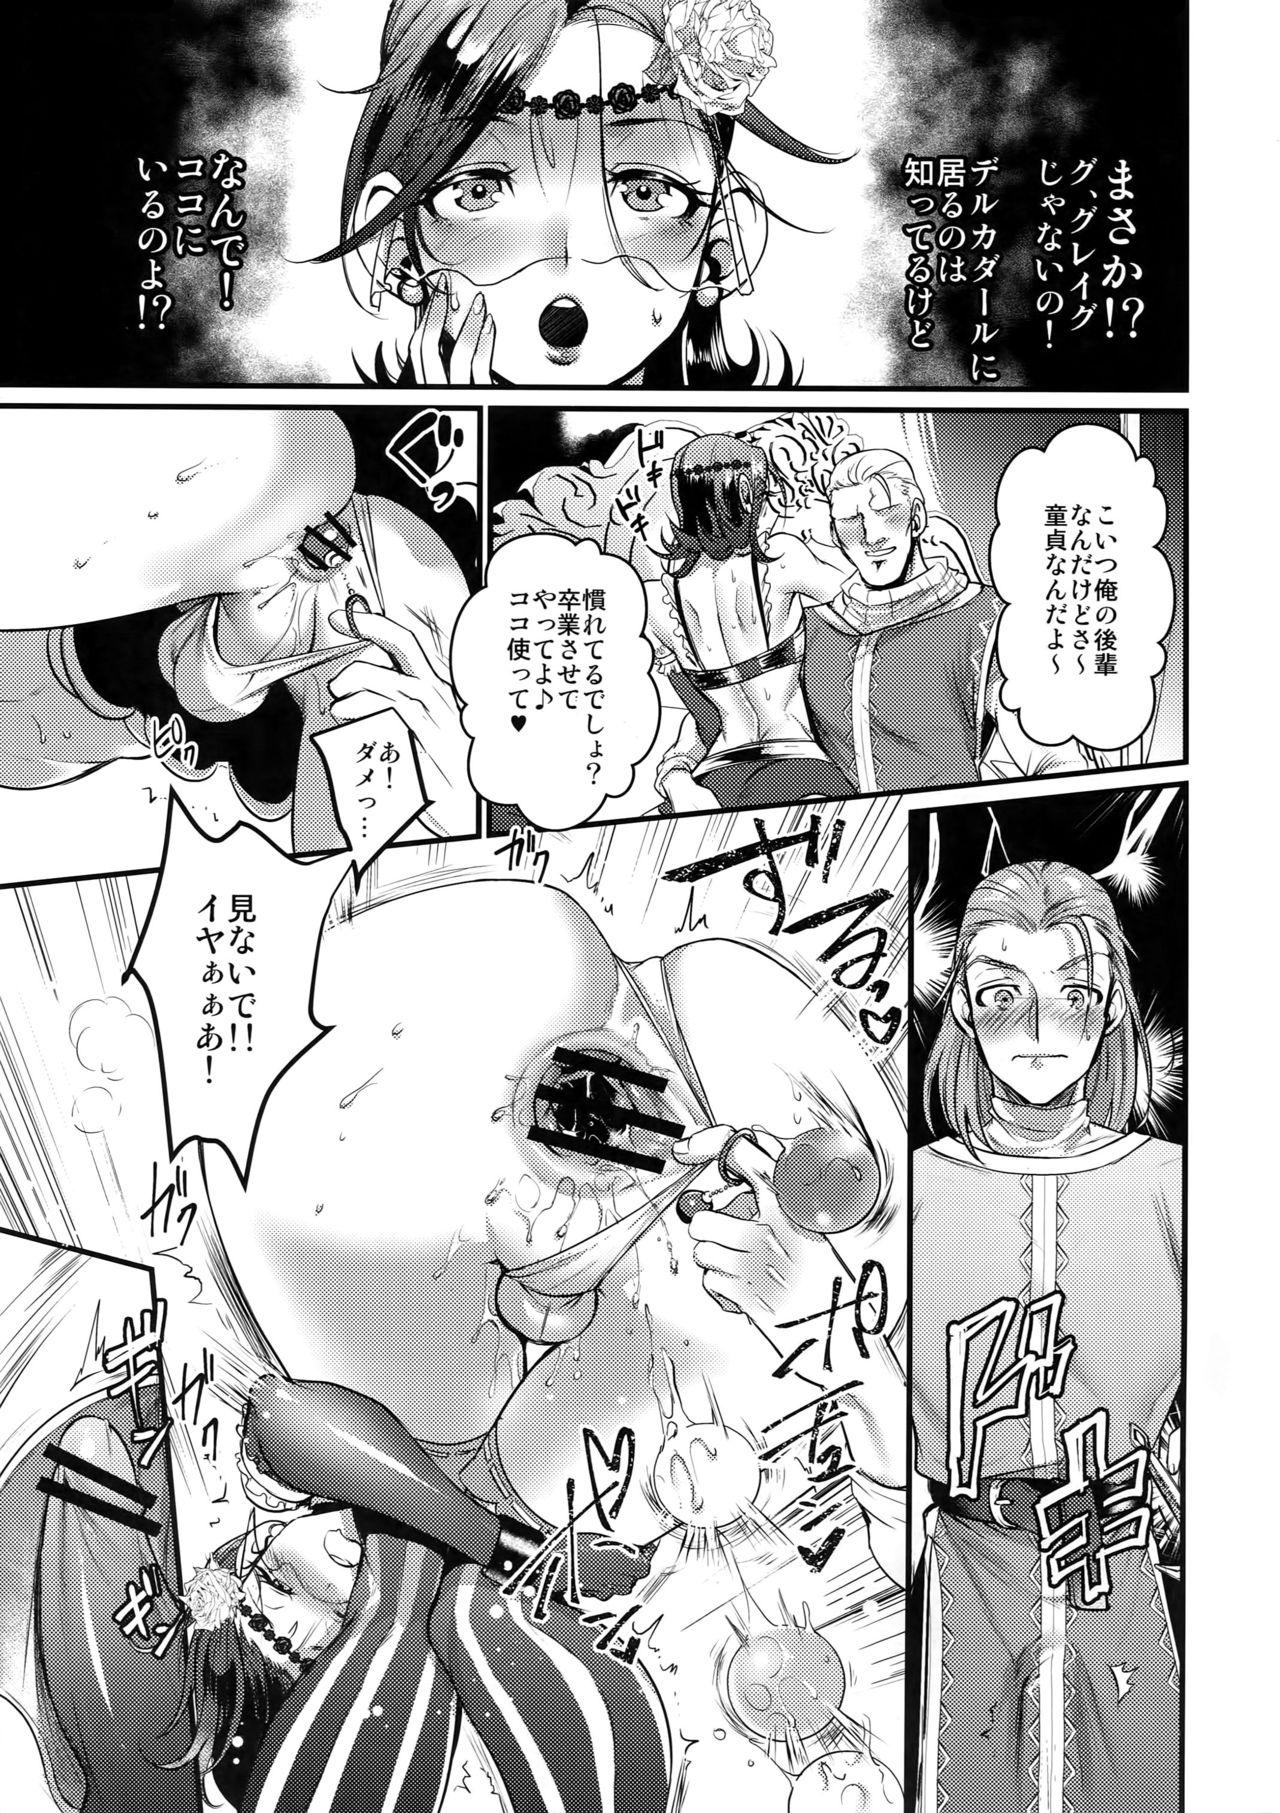 Money Kiss Me Deadly - Dragon quest xi Ano - Page 10